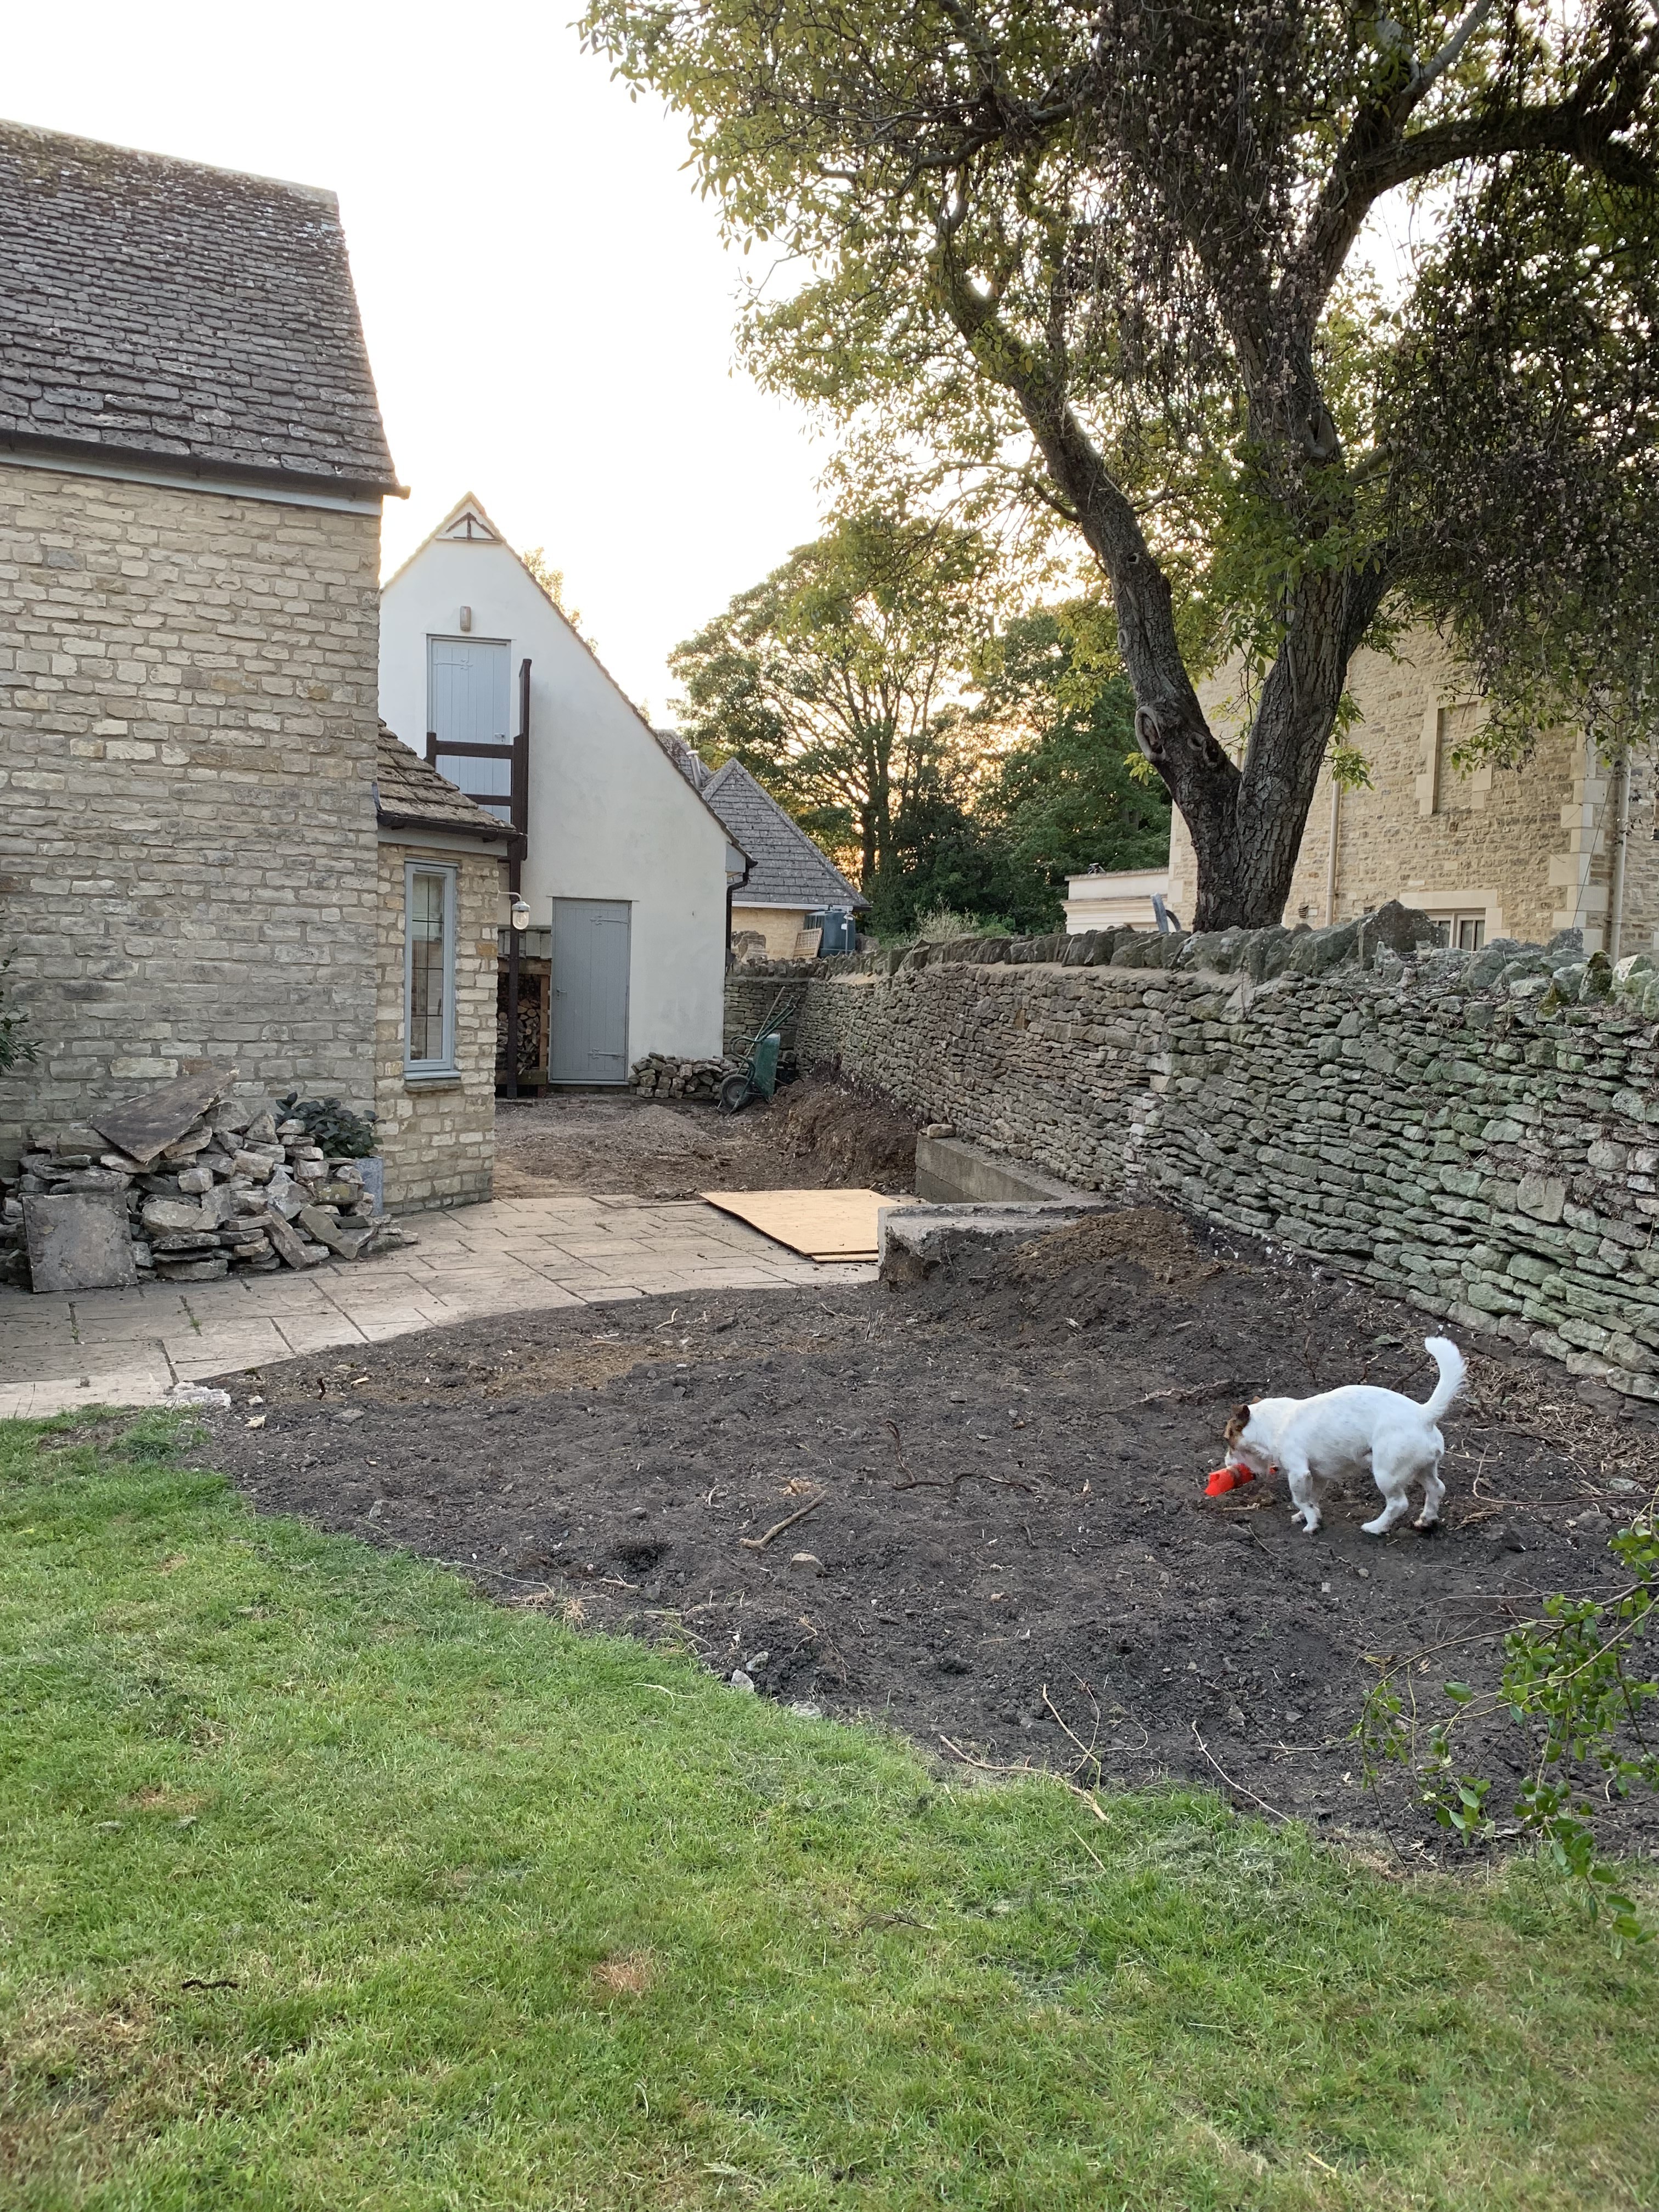 During - Removing stone wall